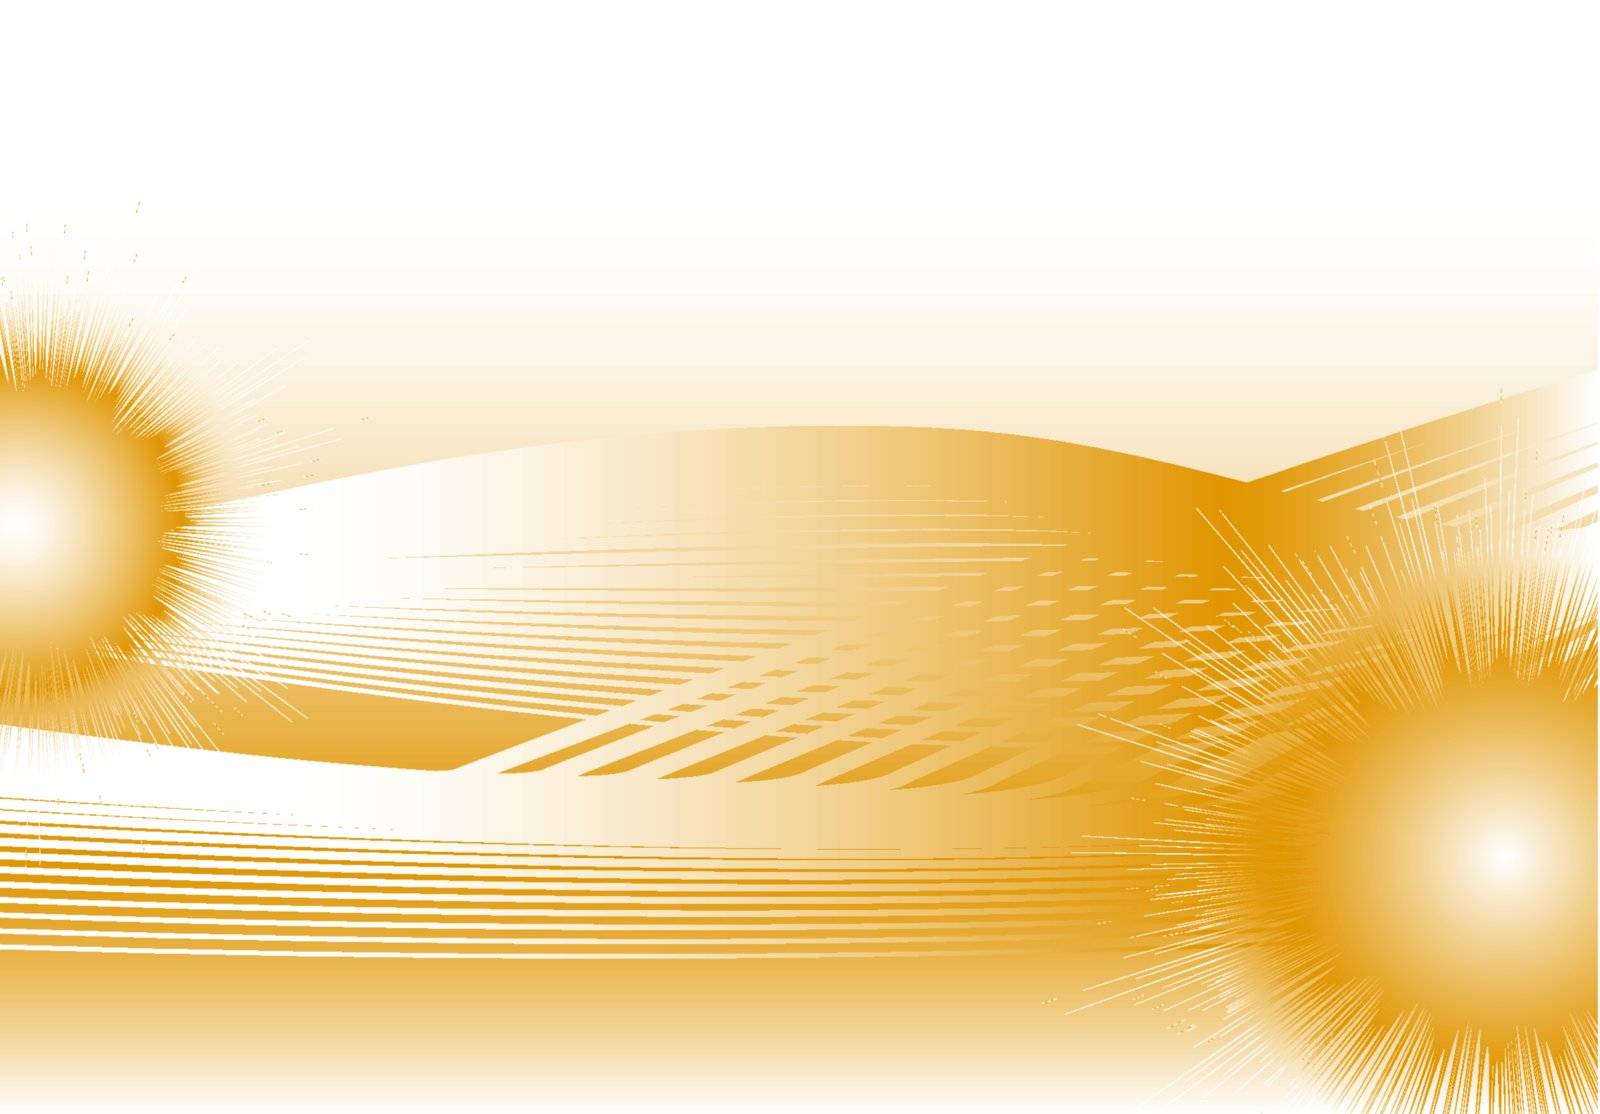 Abstract golden background by pzaxe